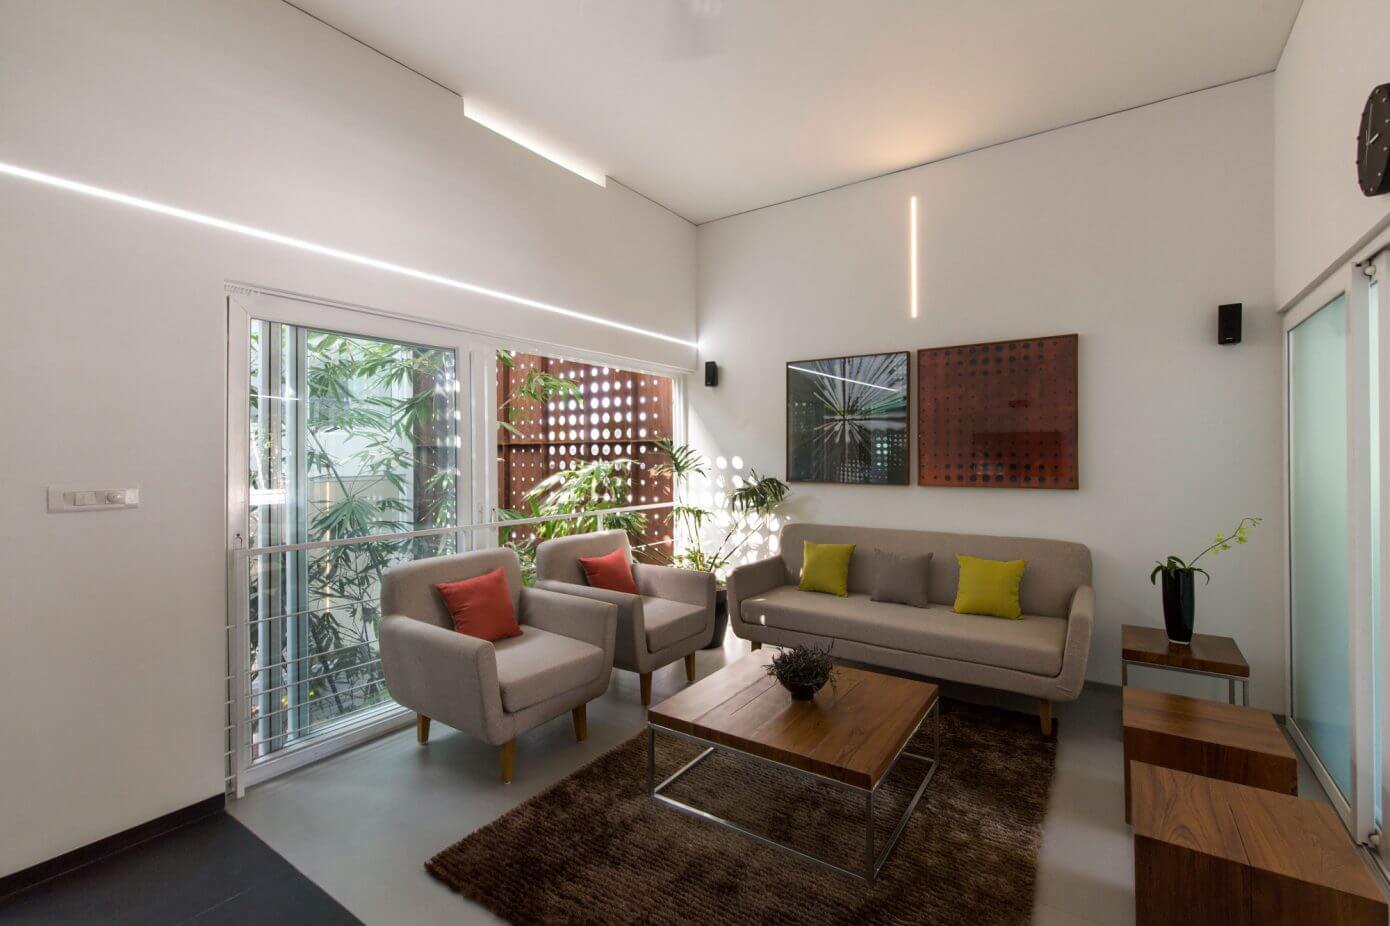 Home in India by LIJO.RENY Architects